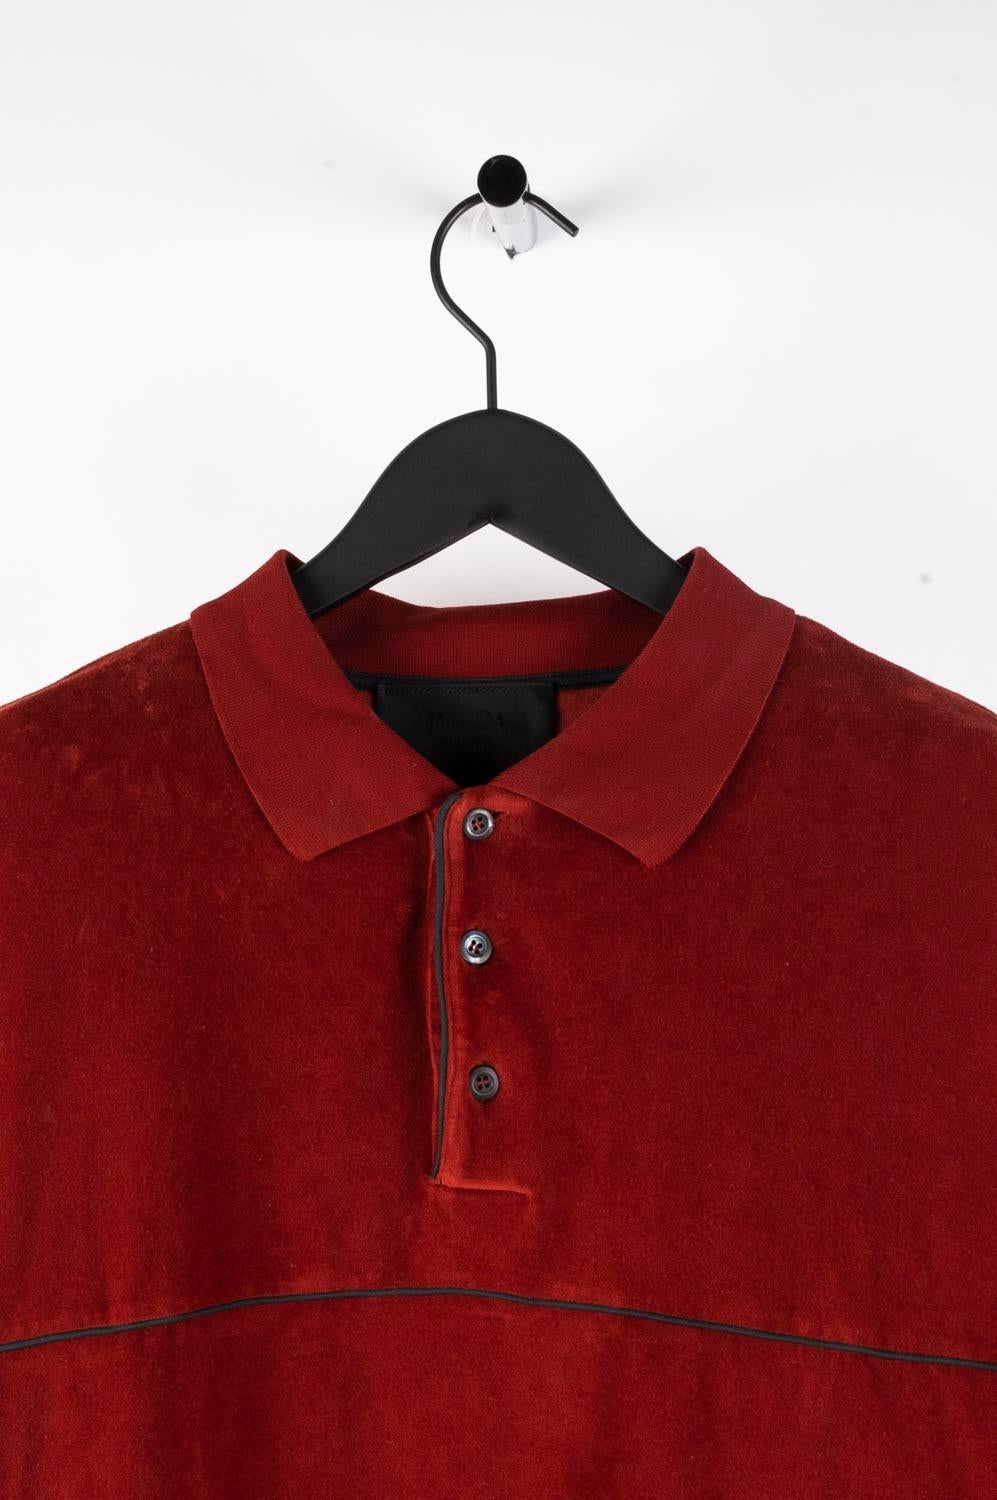 Item for sale is 100% genuine Prada Velour Men Jumper, S492
Color: Pale red
(An actual color may a bit vary due to individual computer screen interpretation)
Material: 100% cotton
Tag size: XL 
This jumper is great quality item. Rate 8.5 of 10, very